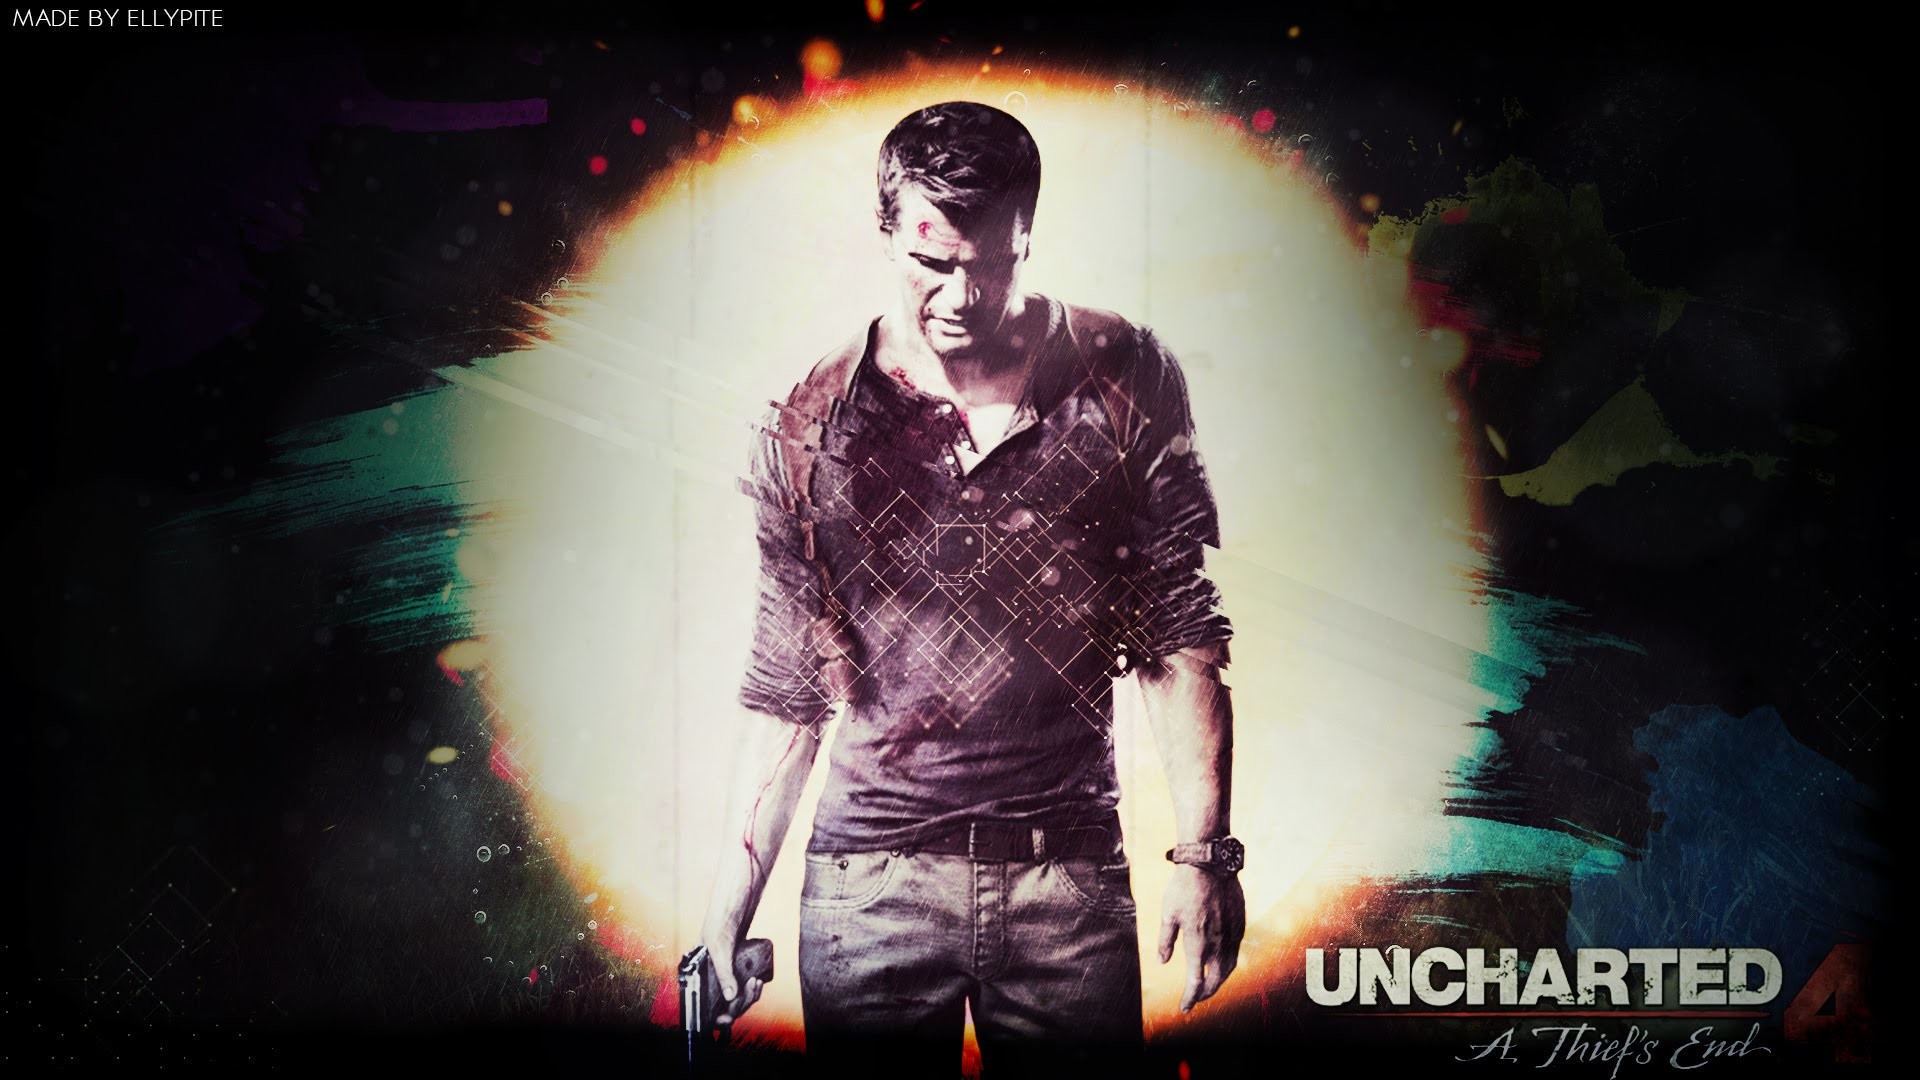 1920x1080 Uncharted 4 – A Thief's End Wallpaper [SpeedArt/Made by Ellypite] - YouTube